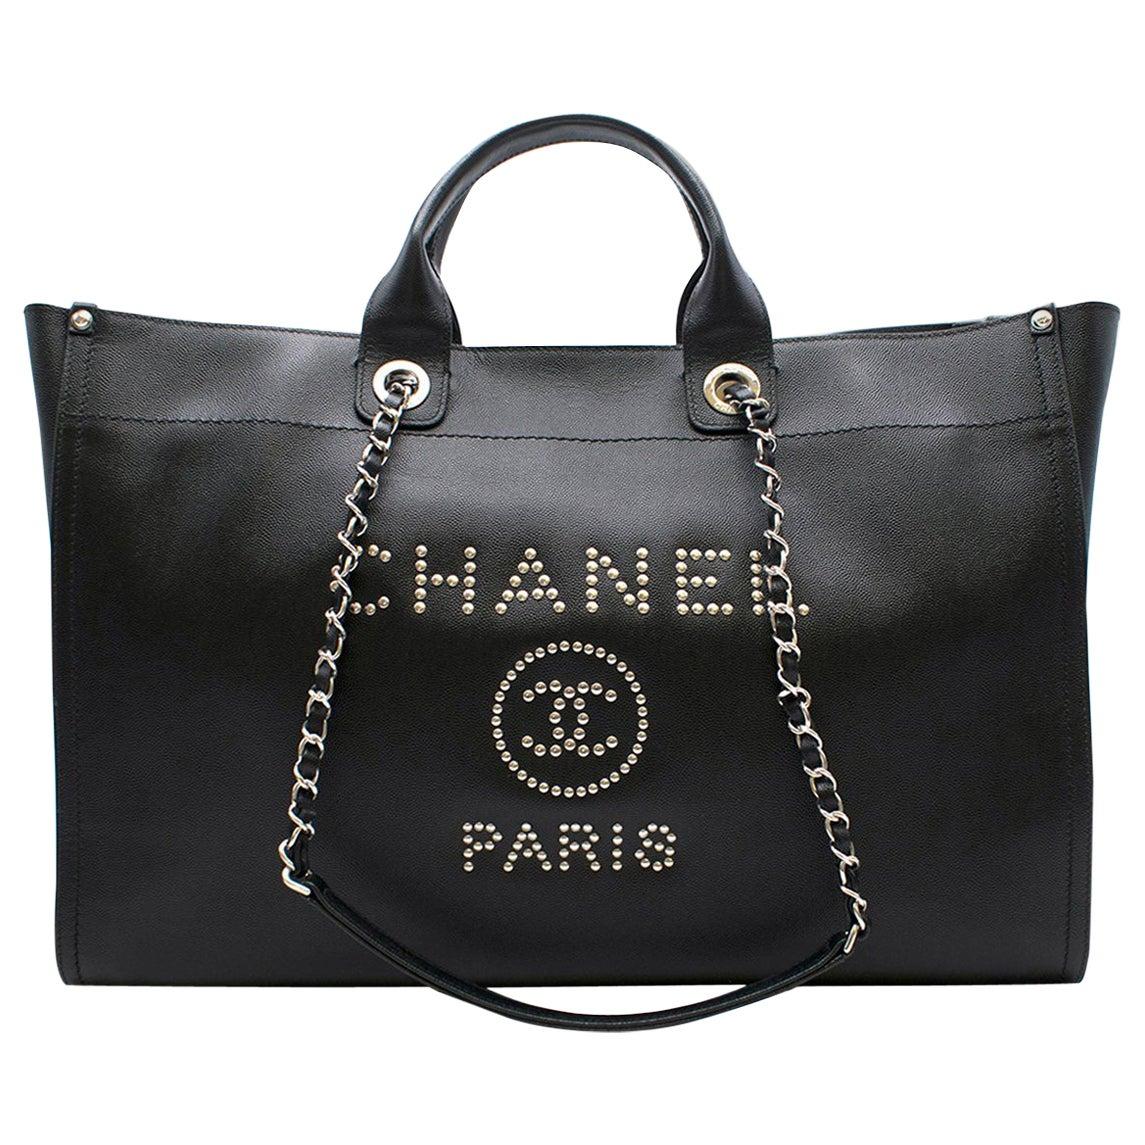 Chanel "Deauville" XL Black Studded Bag